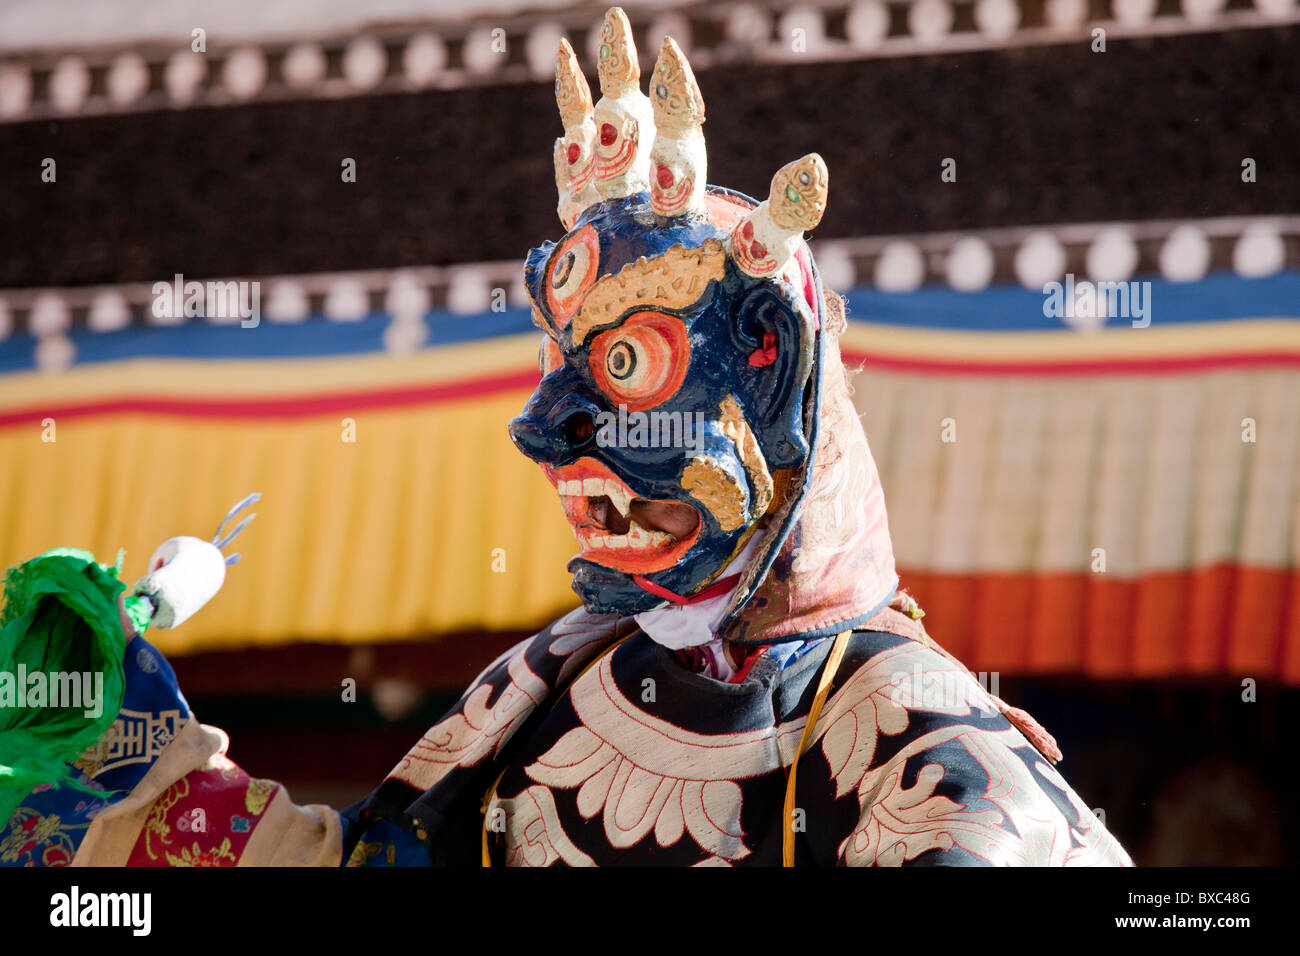 Buddhist mask dancers dressed as Mahakala performing during the Thiksey Gustor festival in Ladakh. Stock Photo